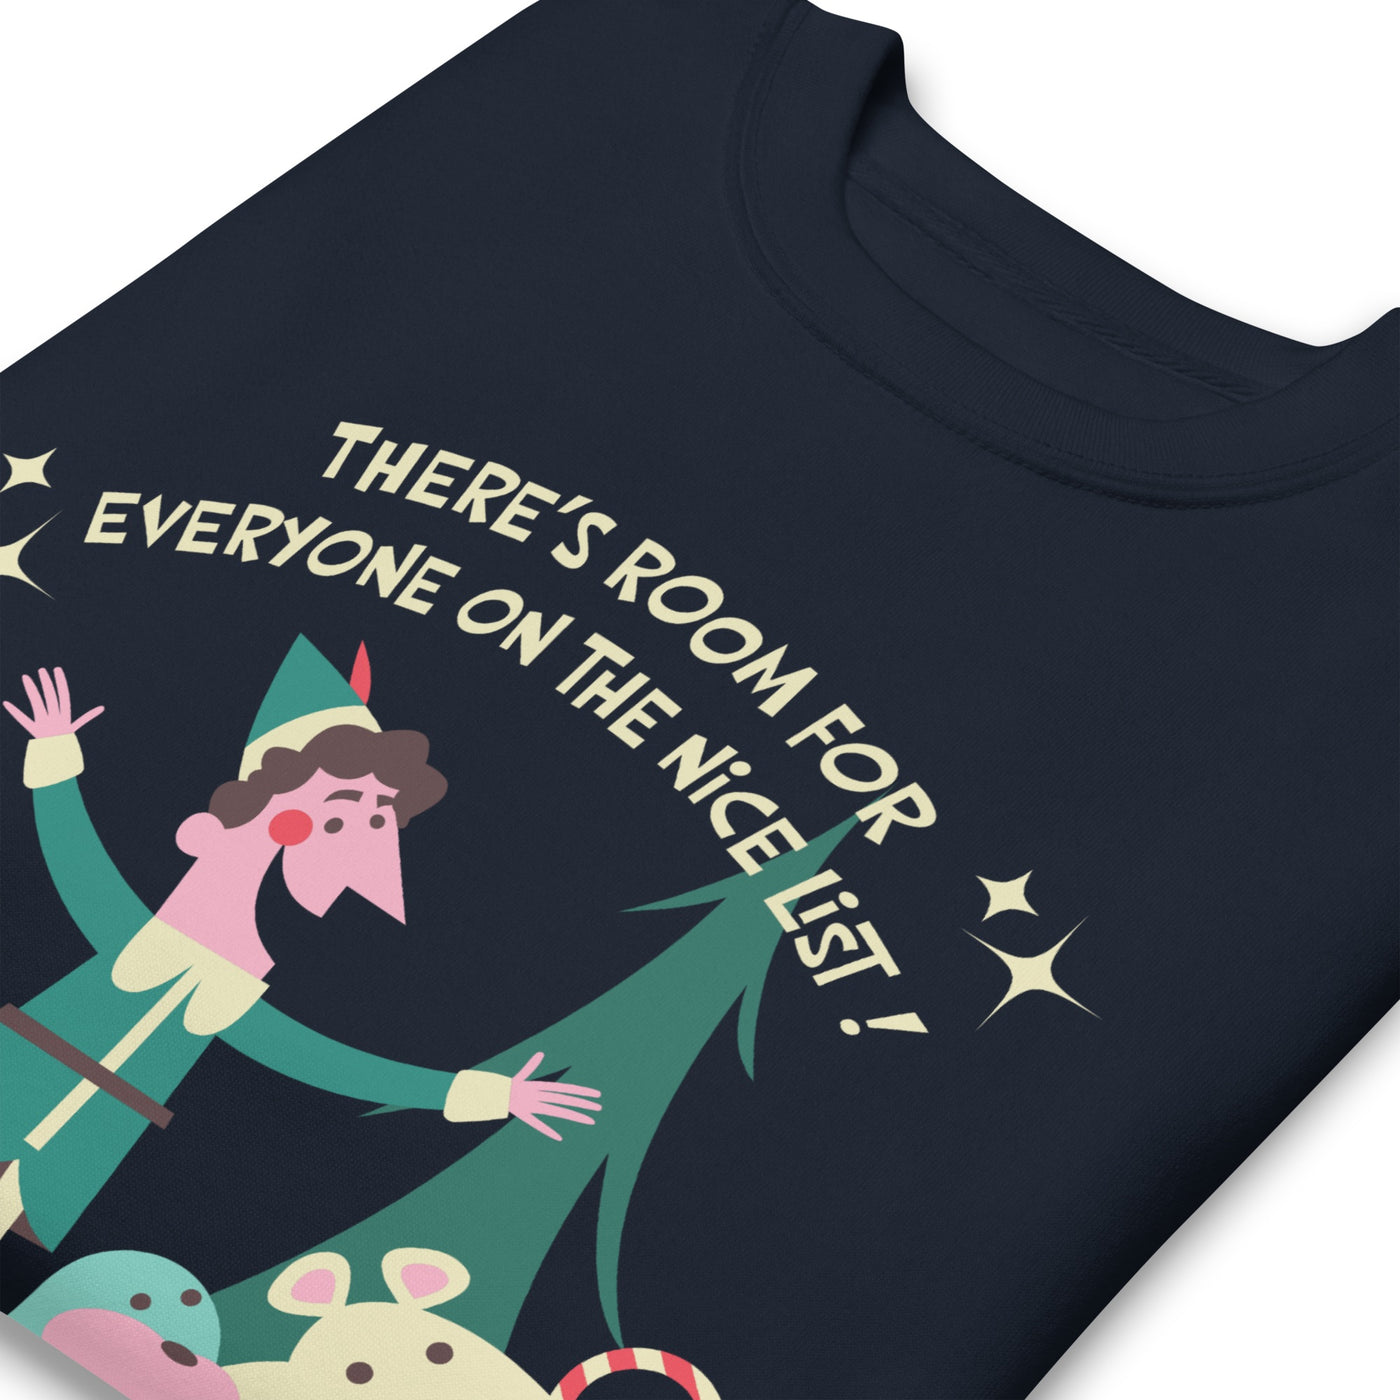 Elf There's Room For Everyone on The Nice List Adult Sweatshirt